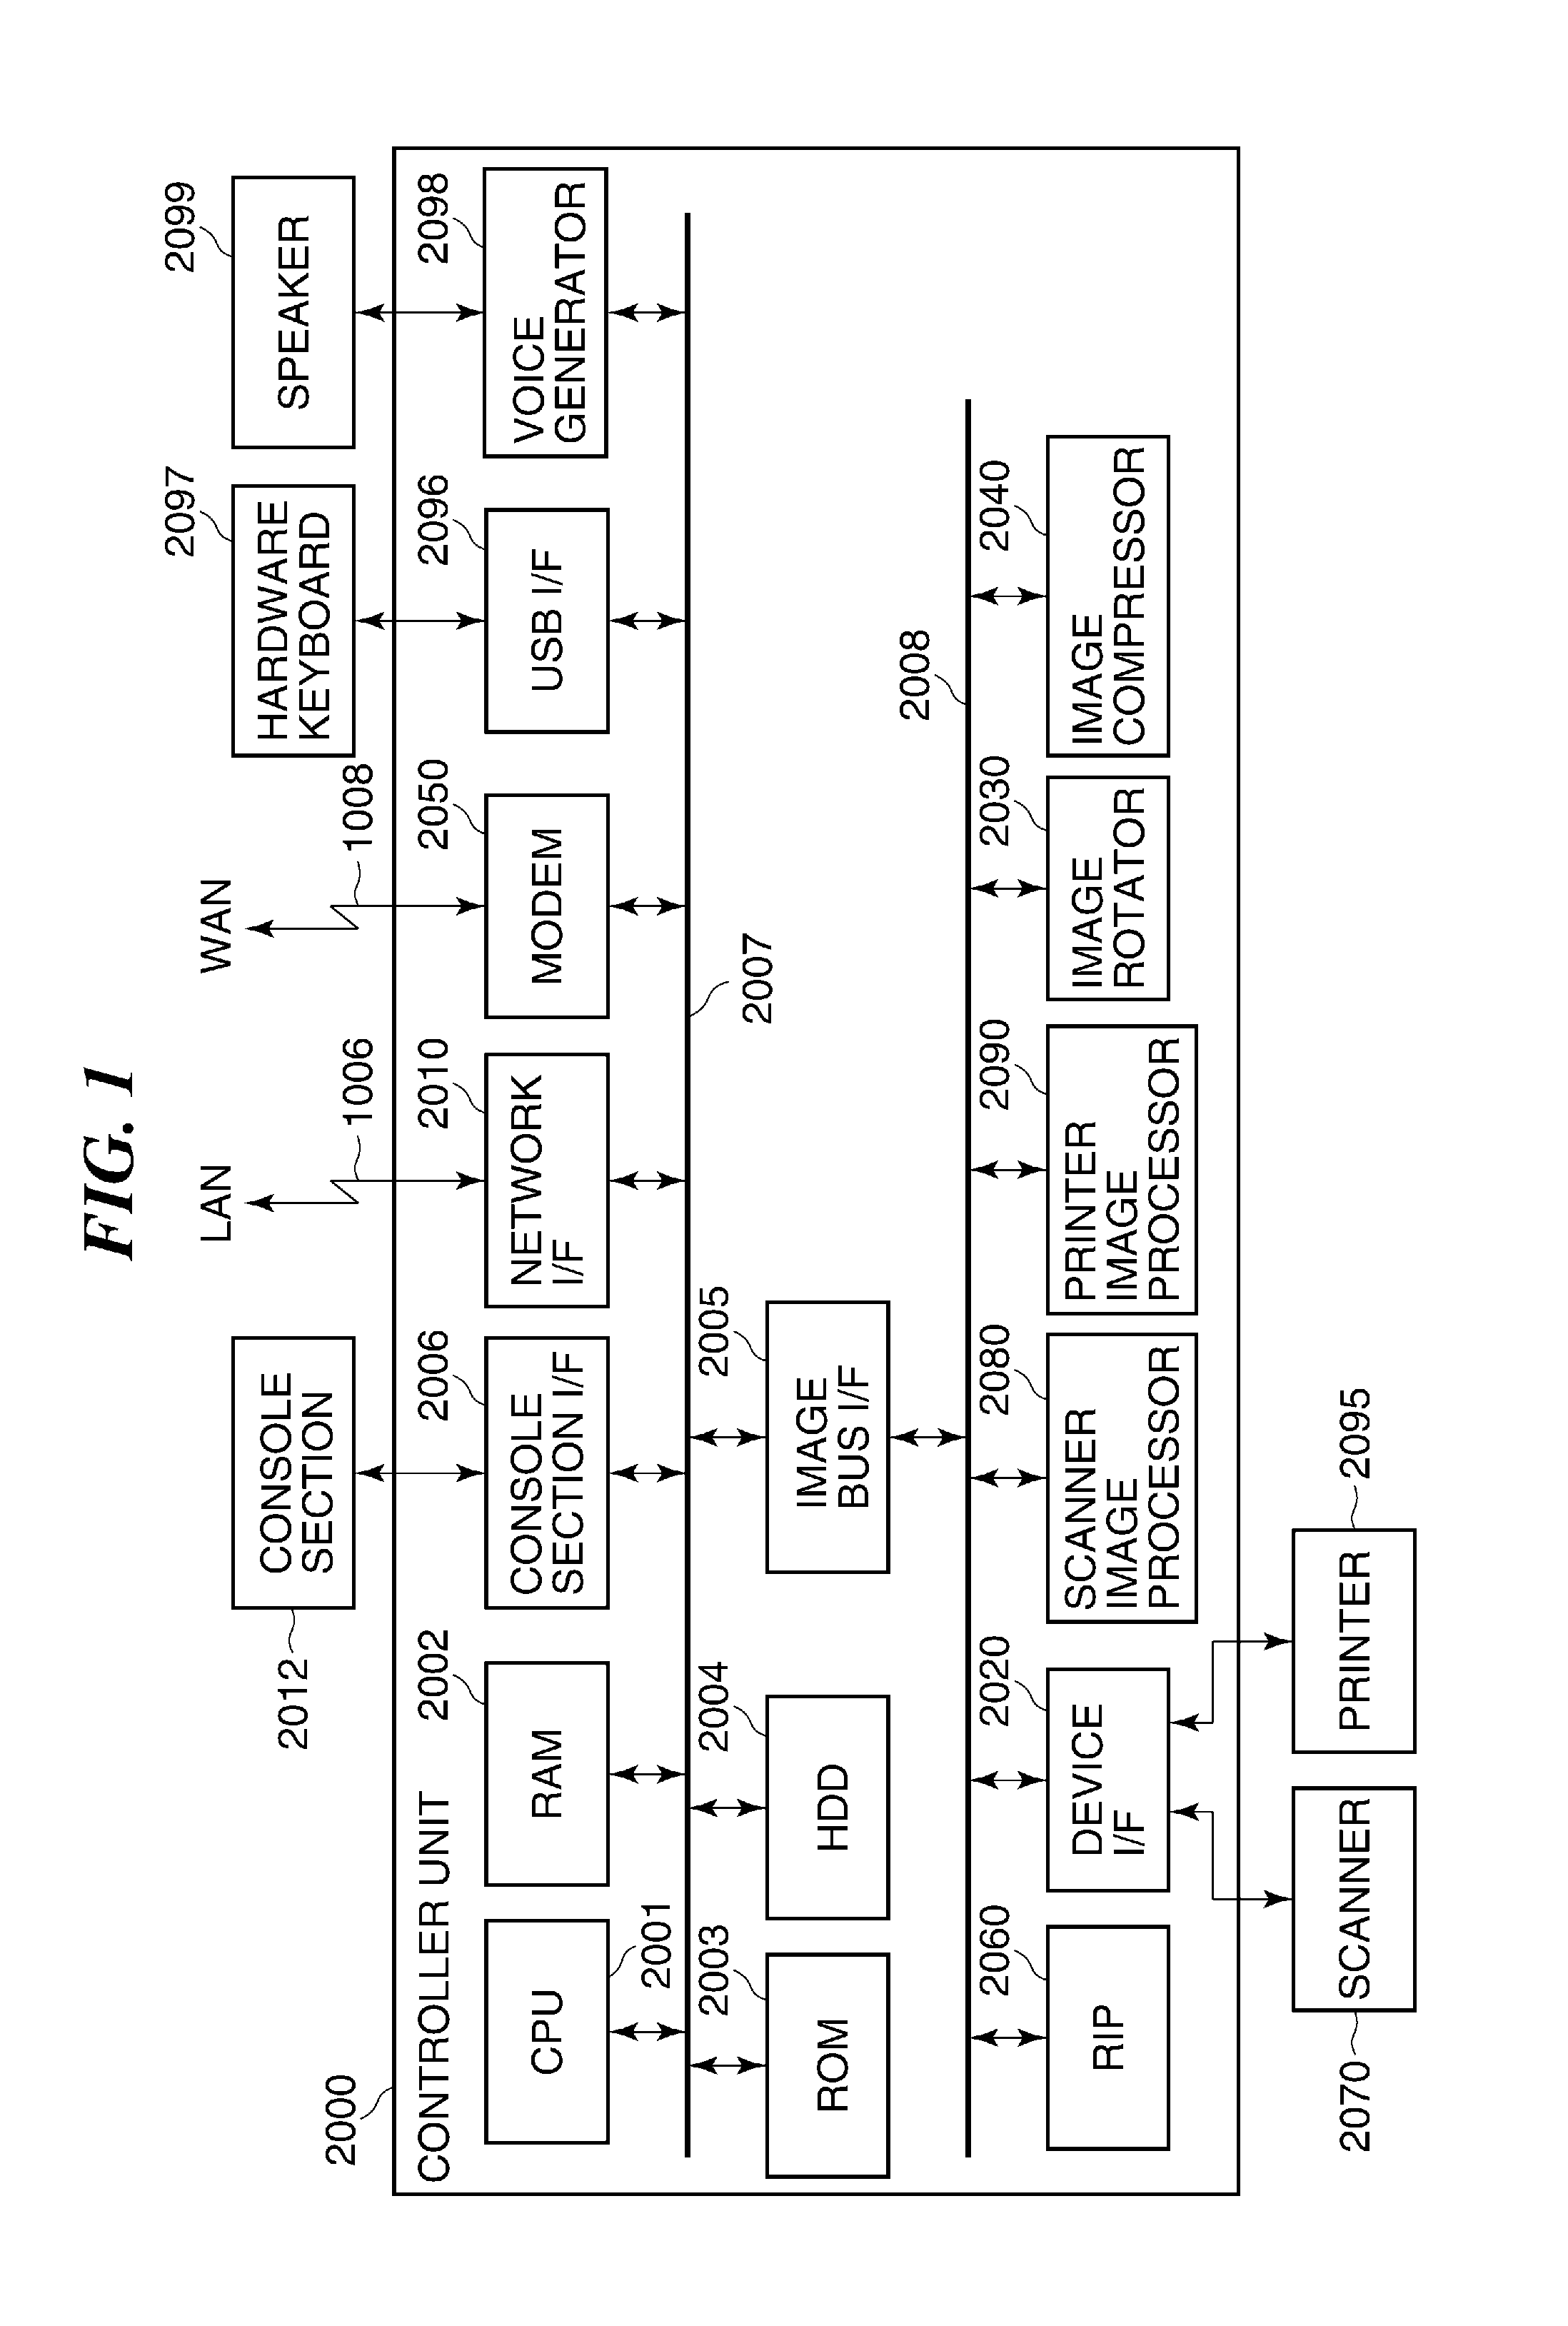 Character input apparatus equipped with auto-complete function, method of controlling the character input apparatus, and storage medium